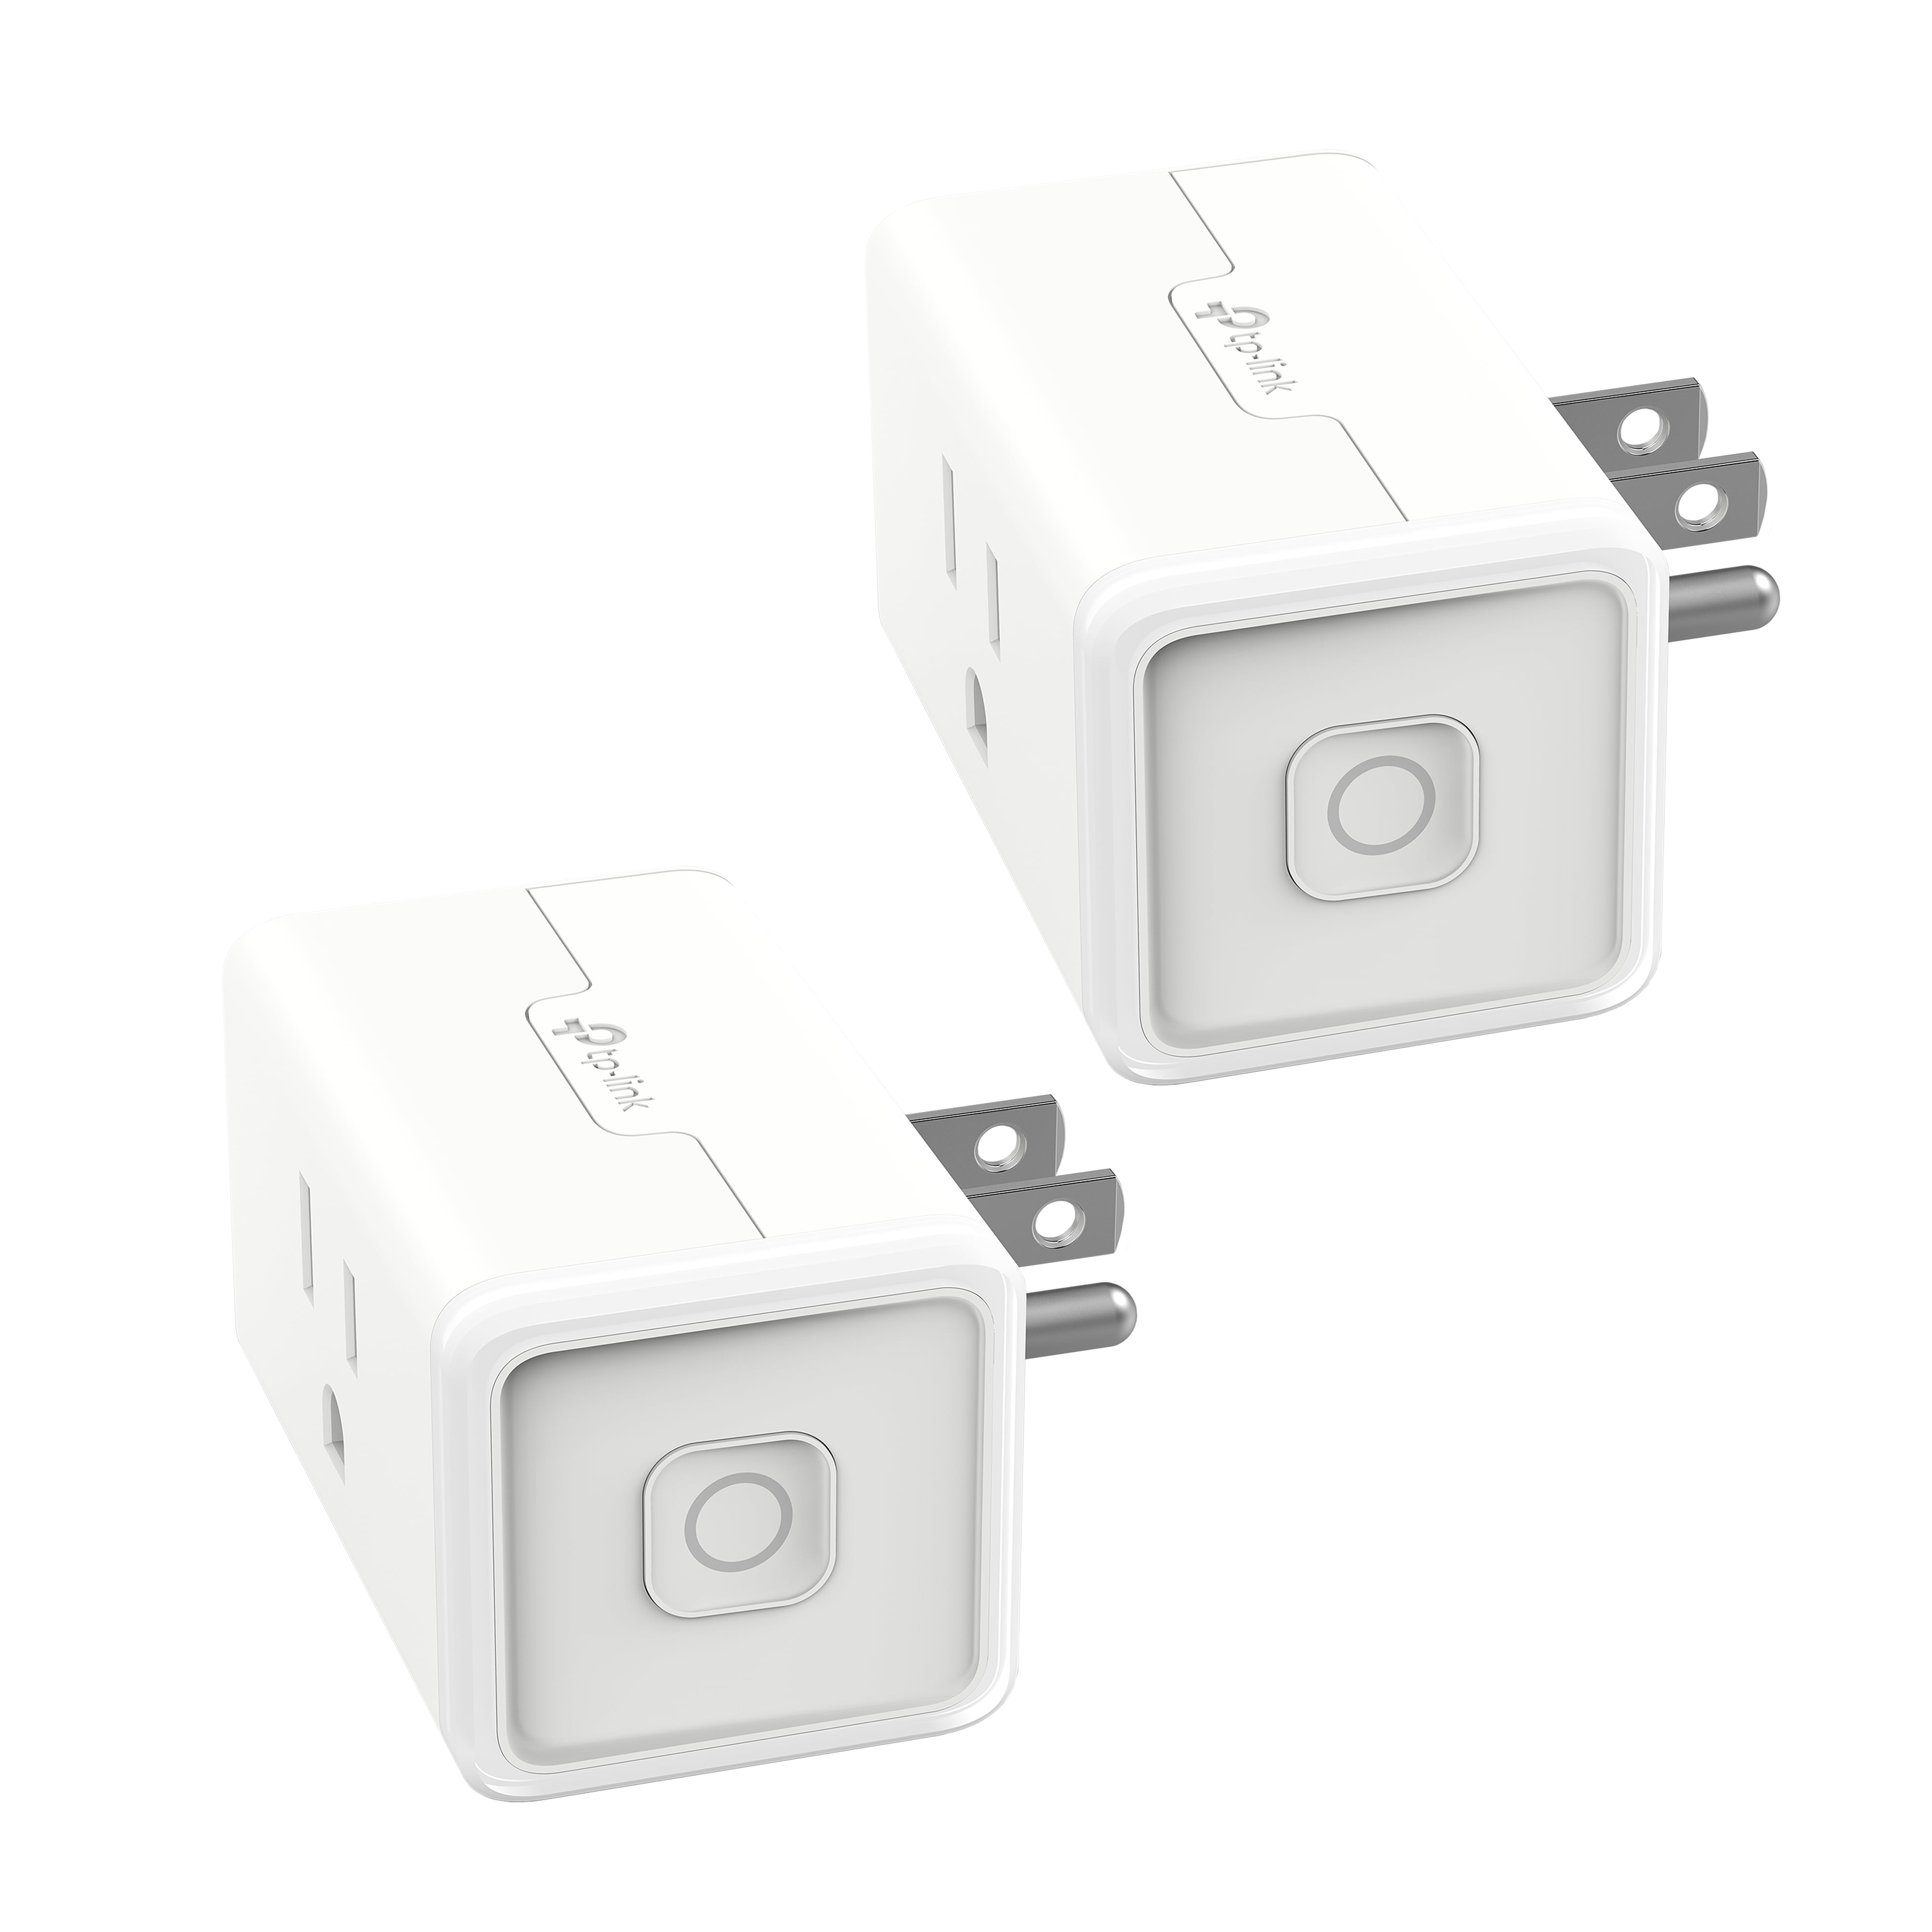 TP-Link Kasa Wi-Fi Smart Plug Slim Edition 2-Pack White - Costless  WHOLESALE - Online Shopping!